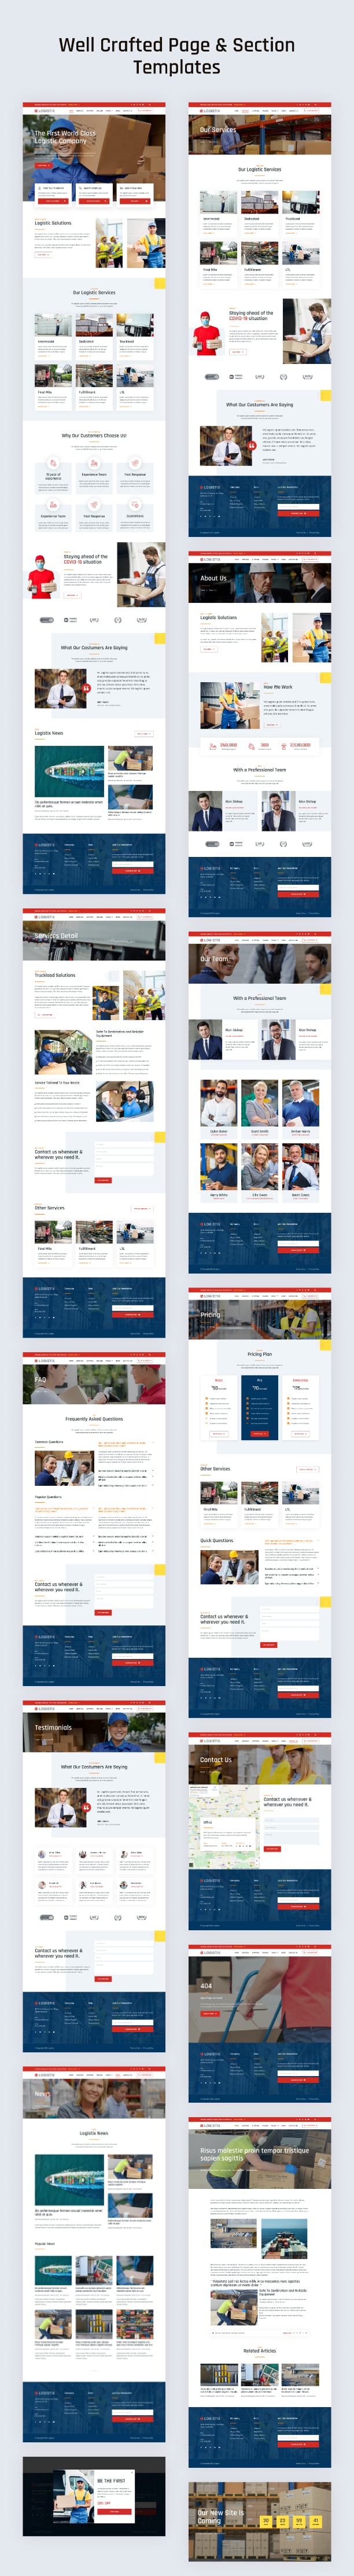 Delivery company website template